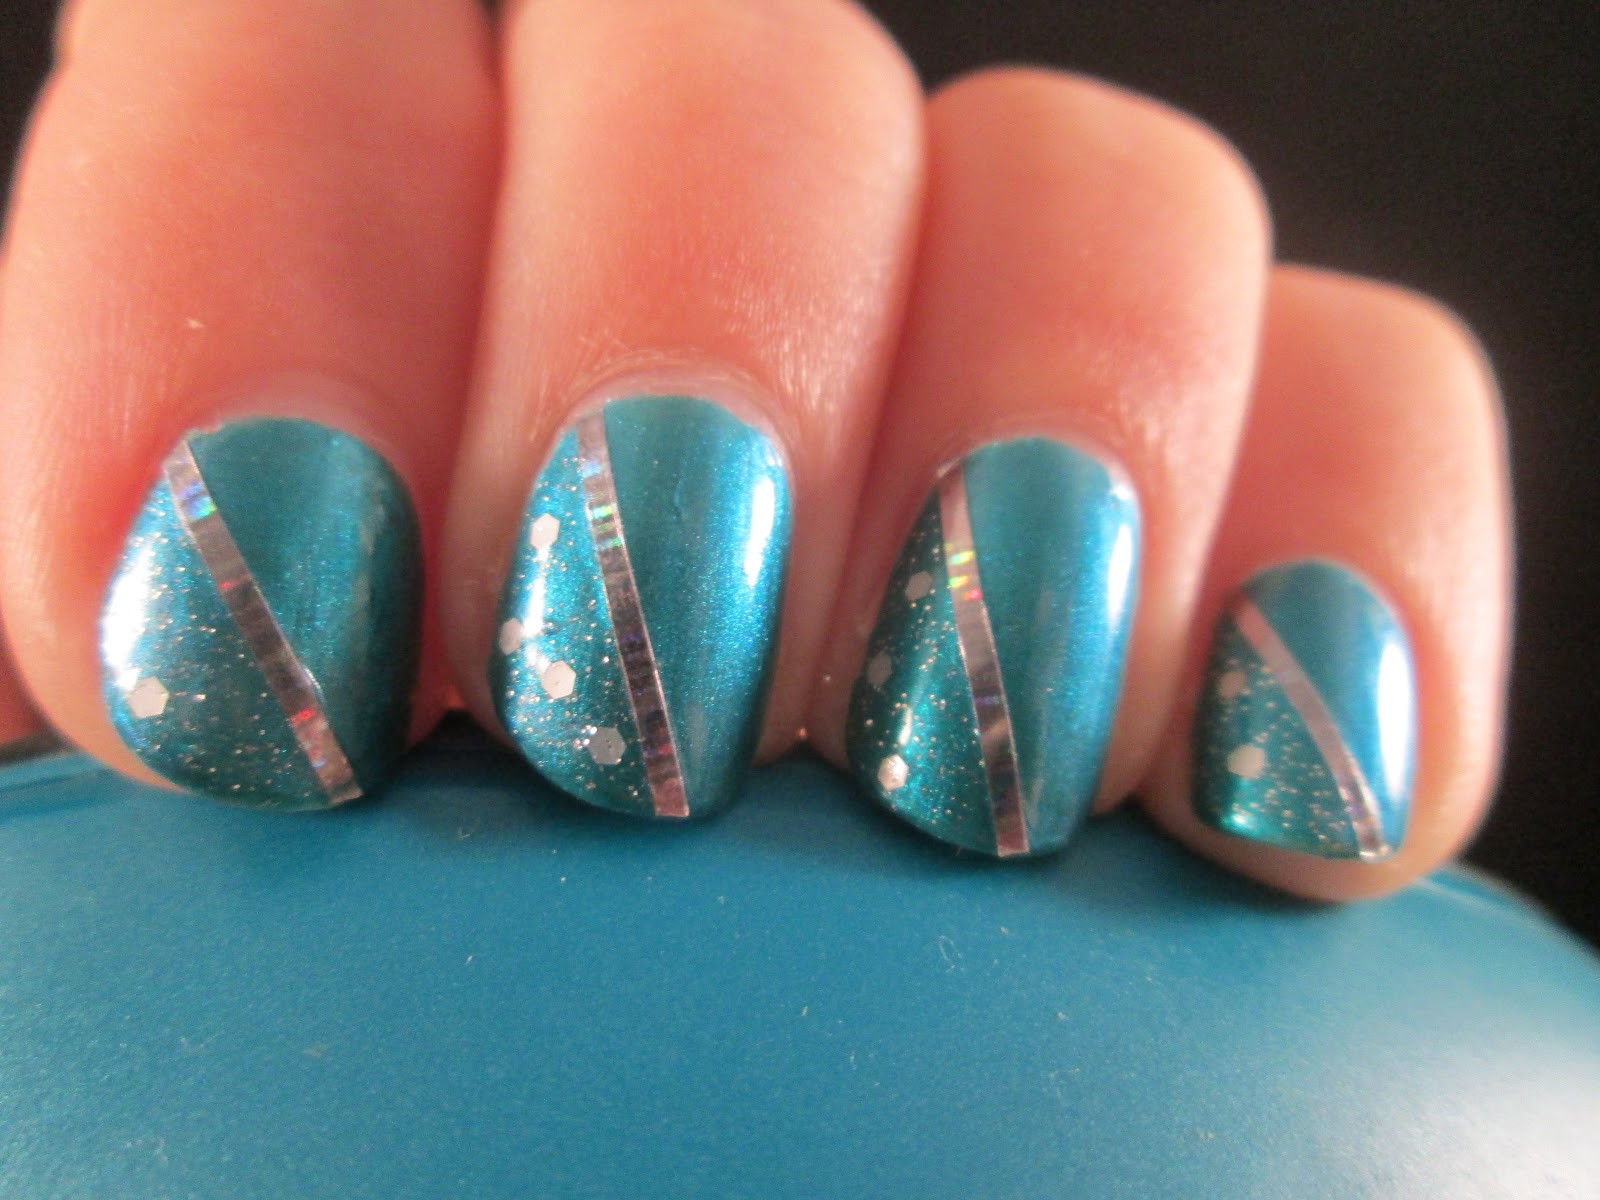 Turquoise Nail Designs
 PiggieLuv Turquoise chique nail art